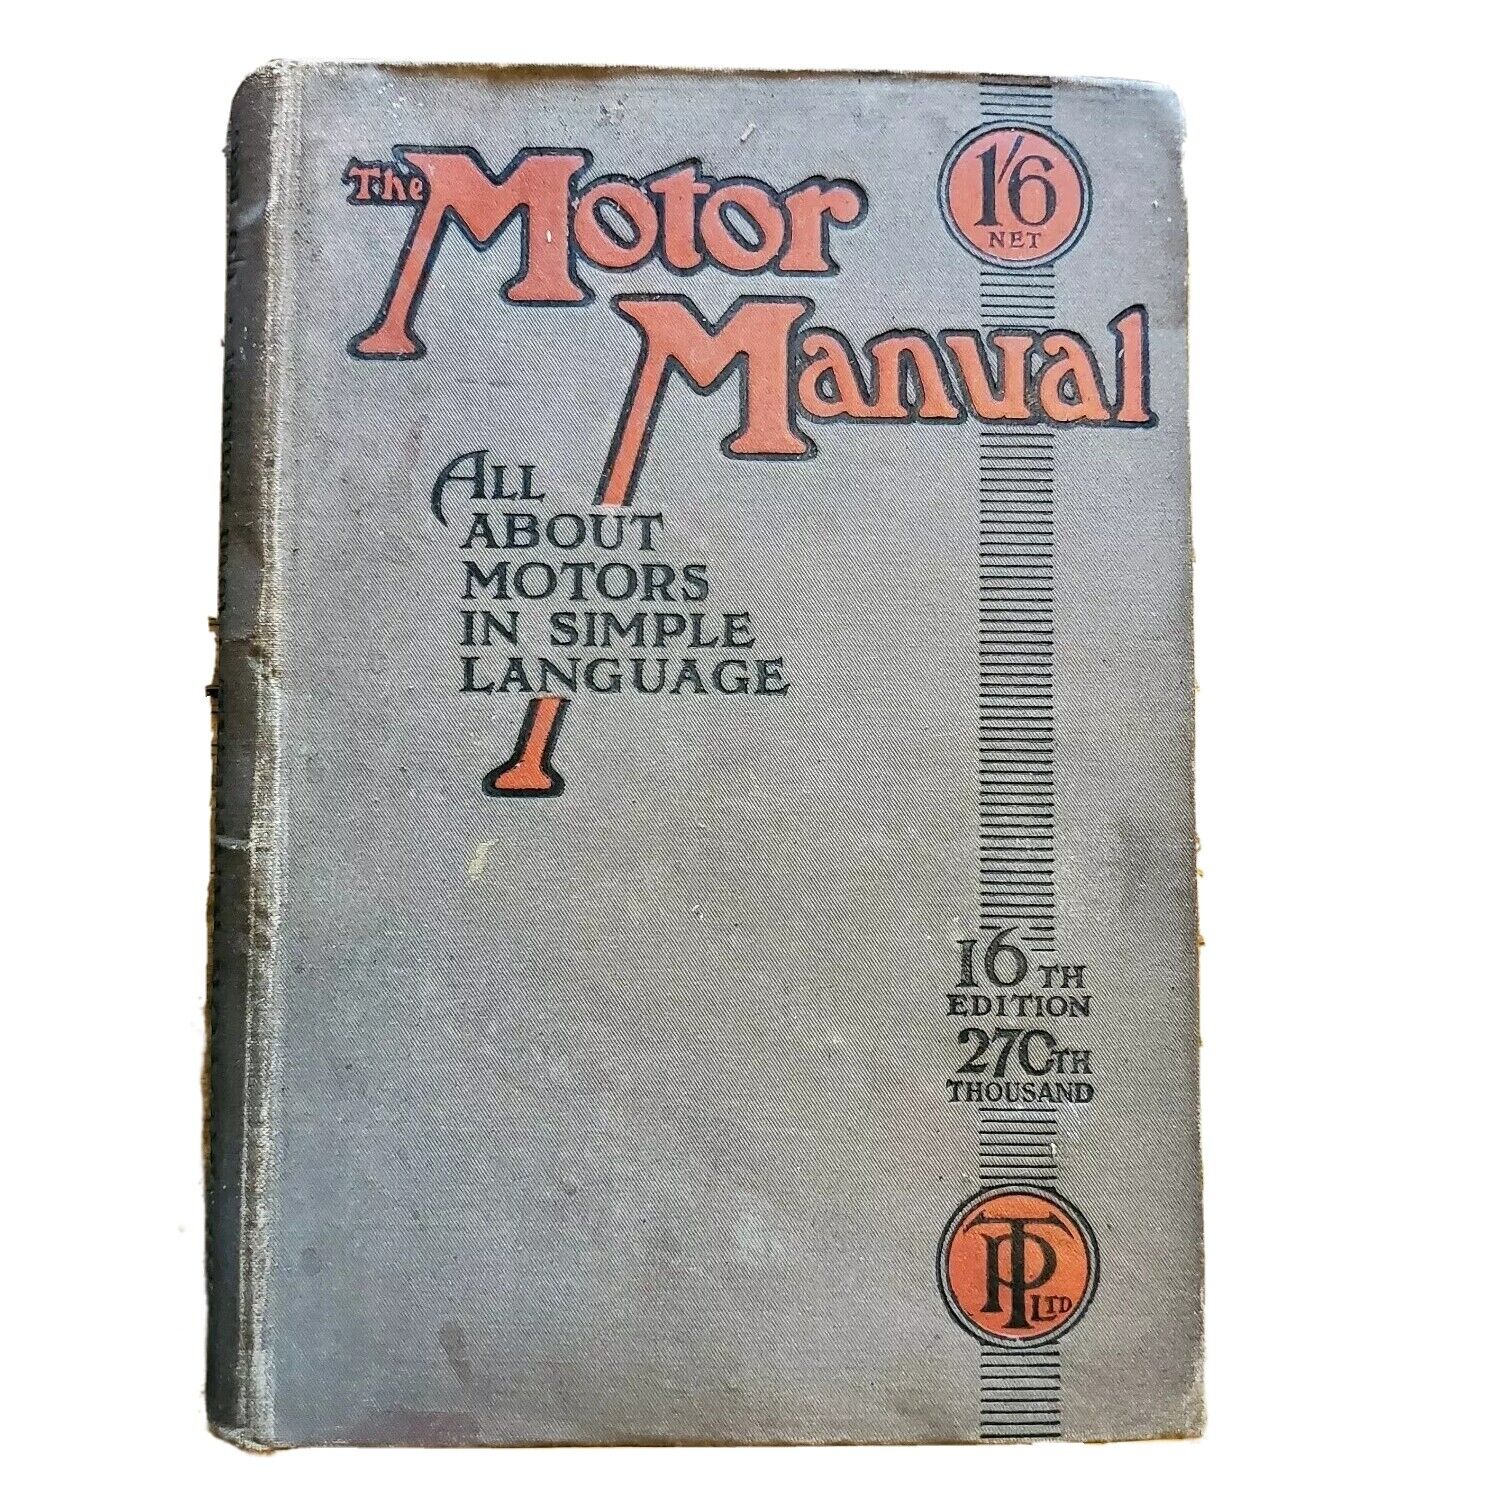 Antique The Motor Manual England 1913 16th Edition Temple Press. Great Ads 